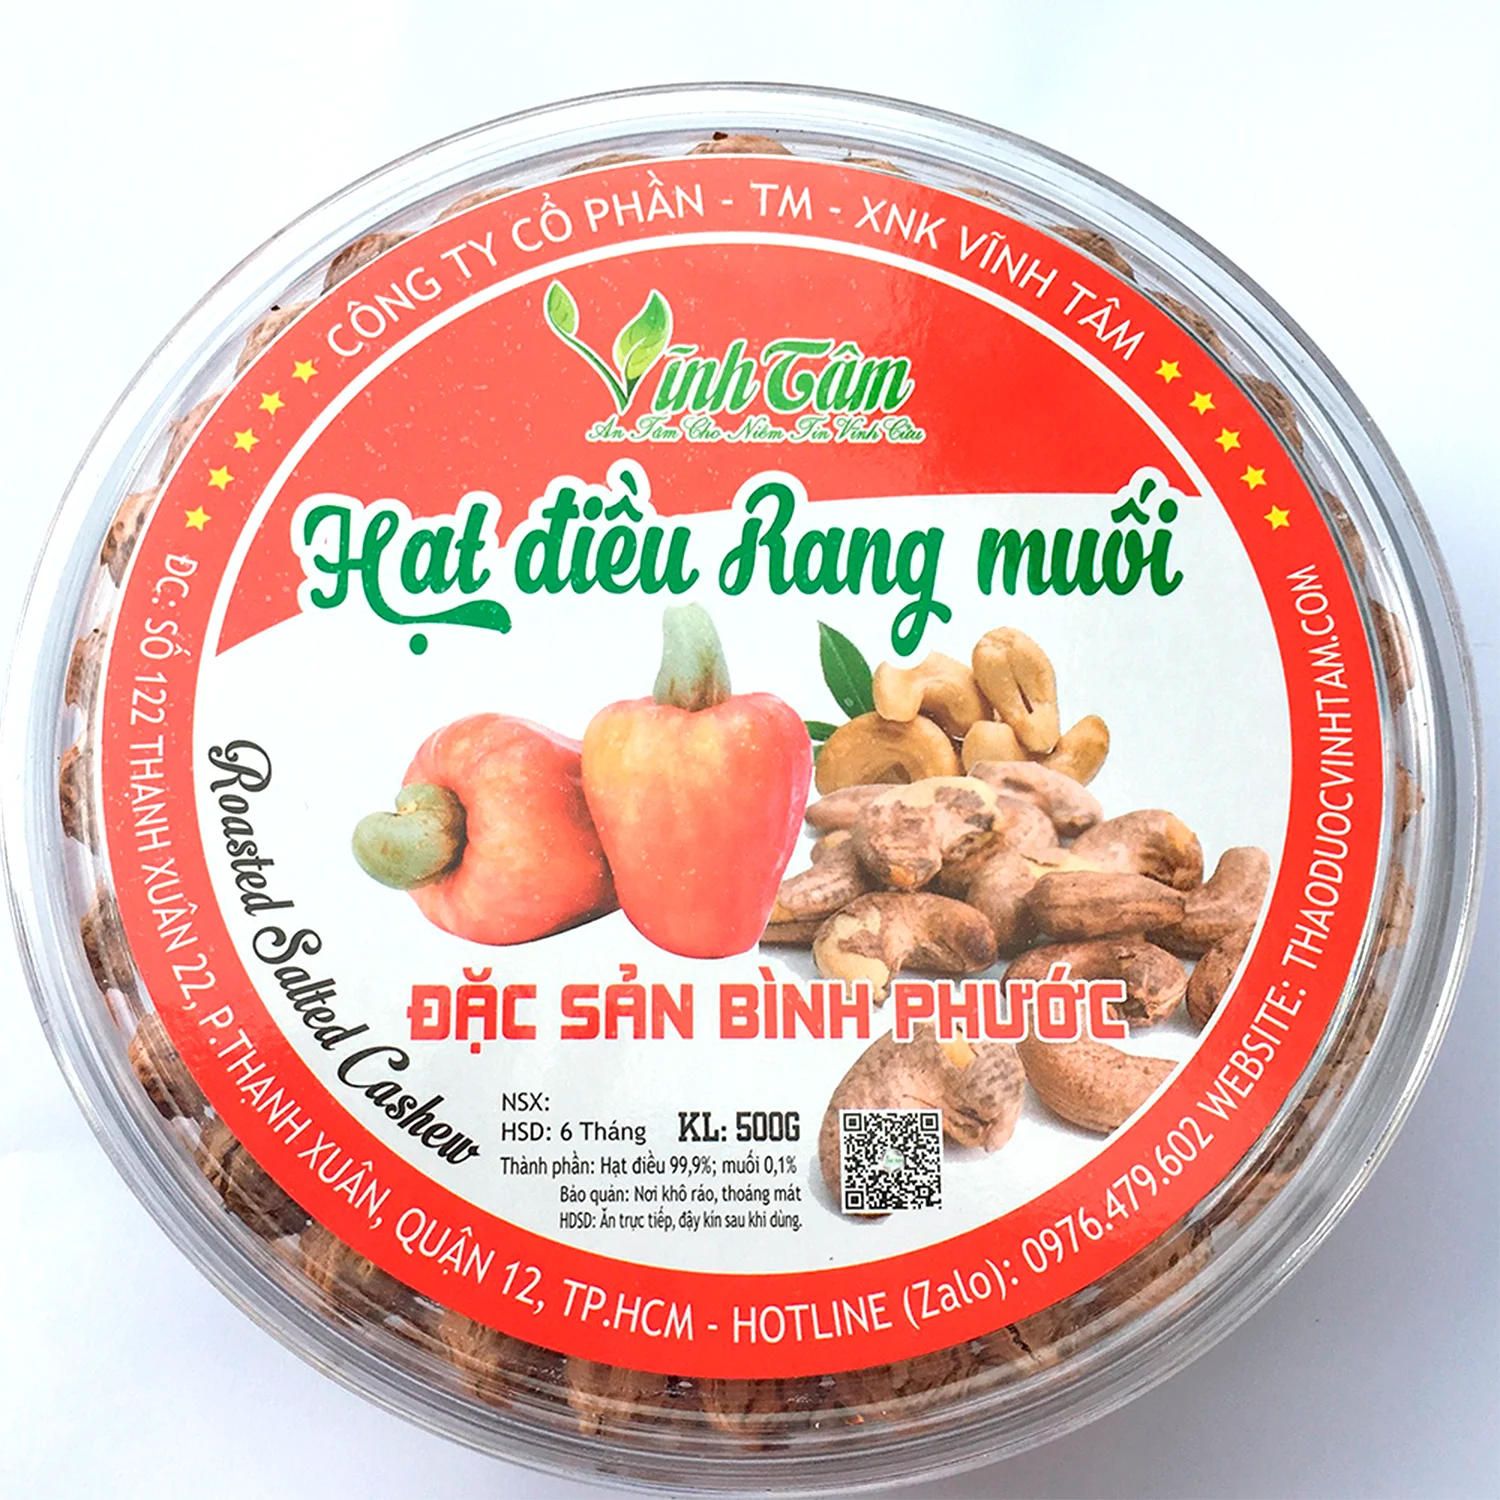 
Salted Roasted Cashews Fresh Nuts Best High Quality Products From Viet Nam V-Store Private Label 